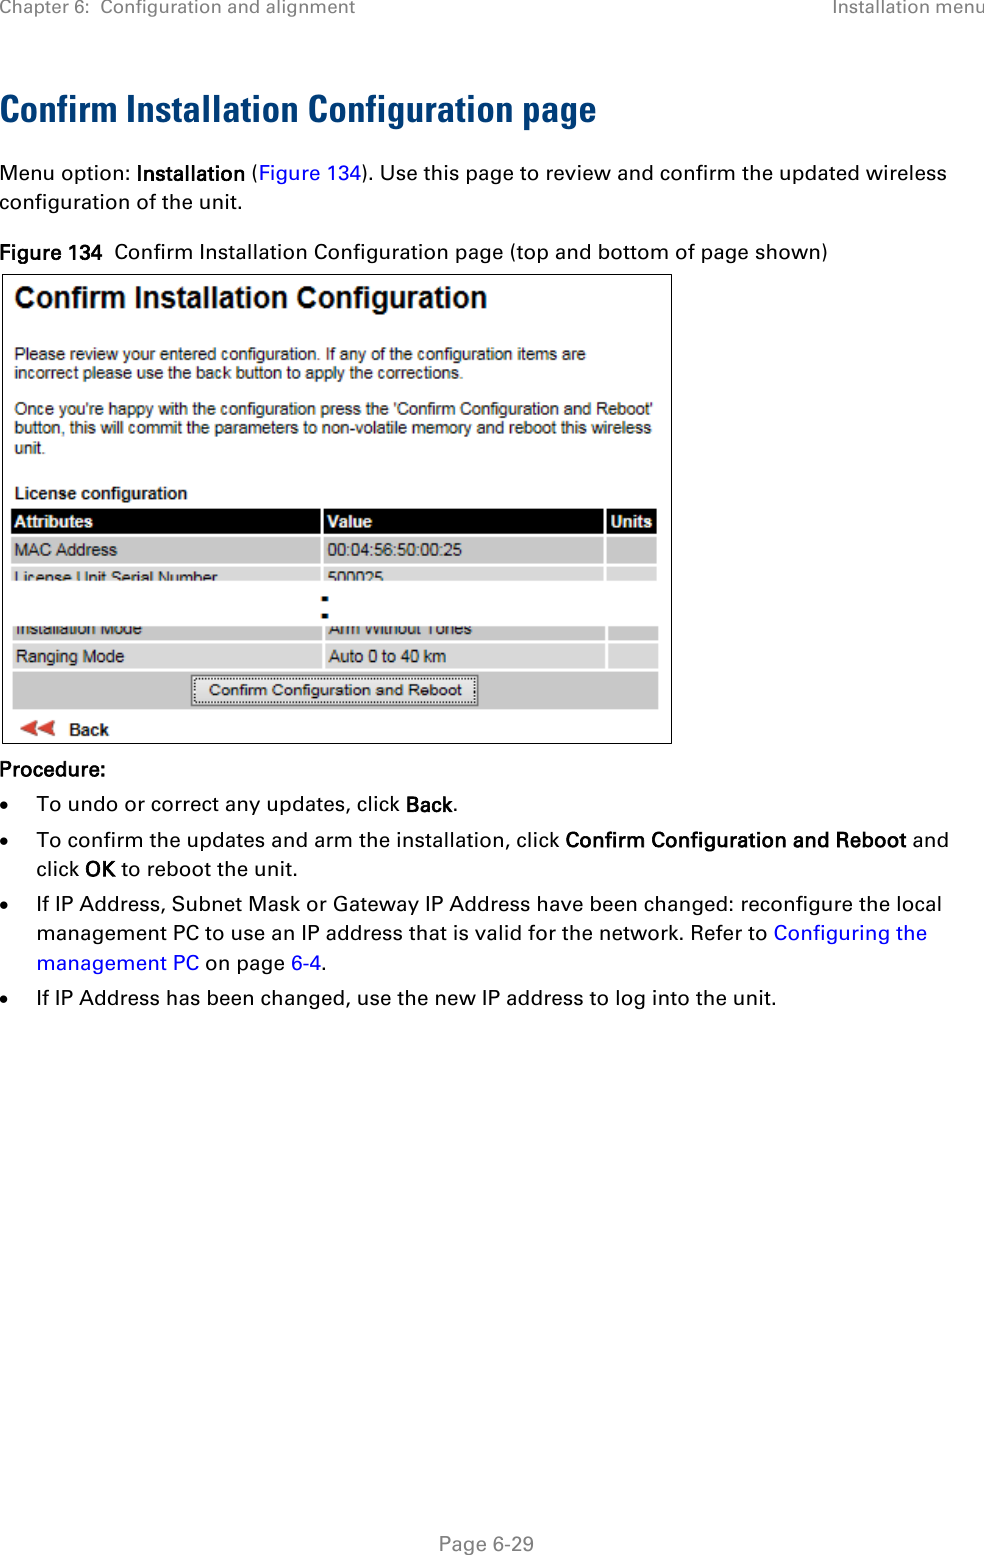 Chapter 6:  Configuration and alignment Installation menu  Confirm Installation Configuration page Menu option: Installation (Figure 134). Use this page to review and confirm the updated wireless configuration of the unit. Figure 134  Confirm Installation Configuration page (top and bottom of page shown)  Procedure: • To undo or correct any updates, click Back. • To confirm the updates and arm the installation, click Confirm Configuration and Reboot and click OK to reboot the unit. • If IP Address, Subnet Mask or Gateway IP Address have been changed: reconfigure the local management PC to use an IP address that is valid for the network. Refer to Configuring the management PC on page 6-4. • If IP Address has been changed, use the new IP address to log into the unit.   Page 6-29 